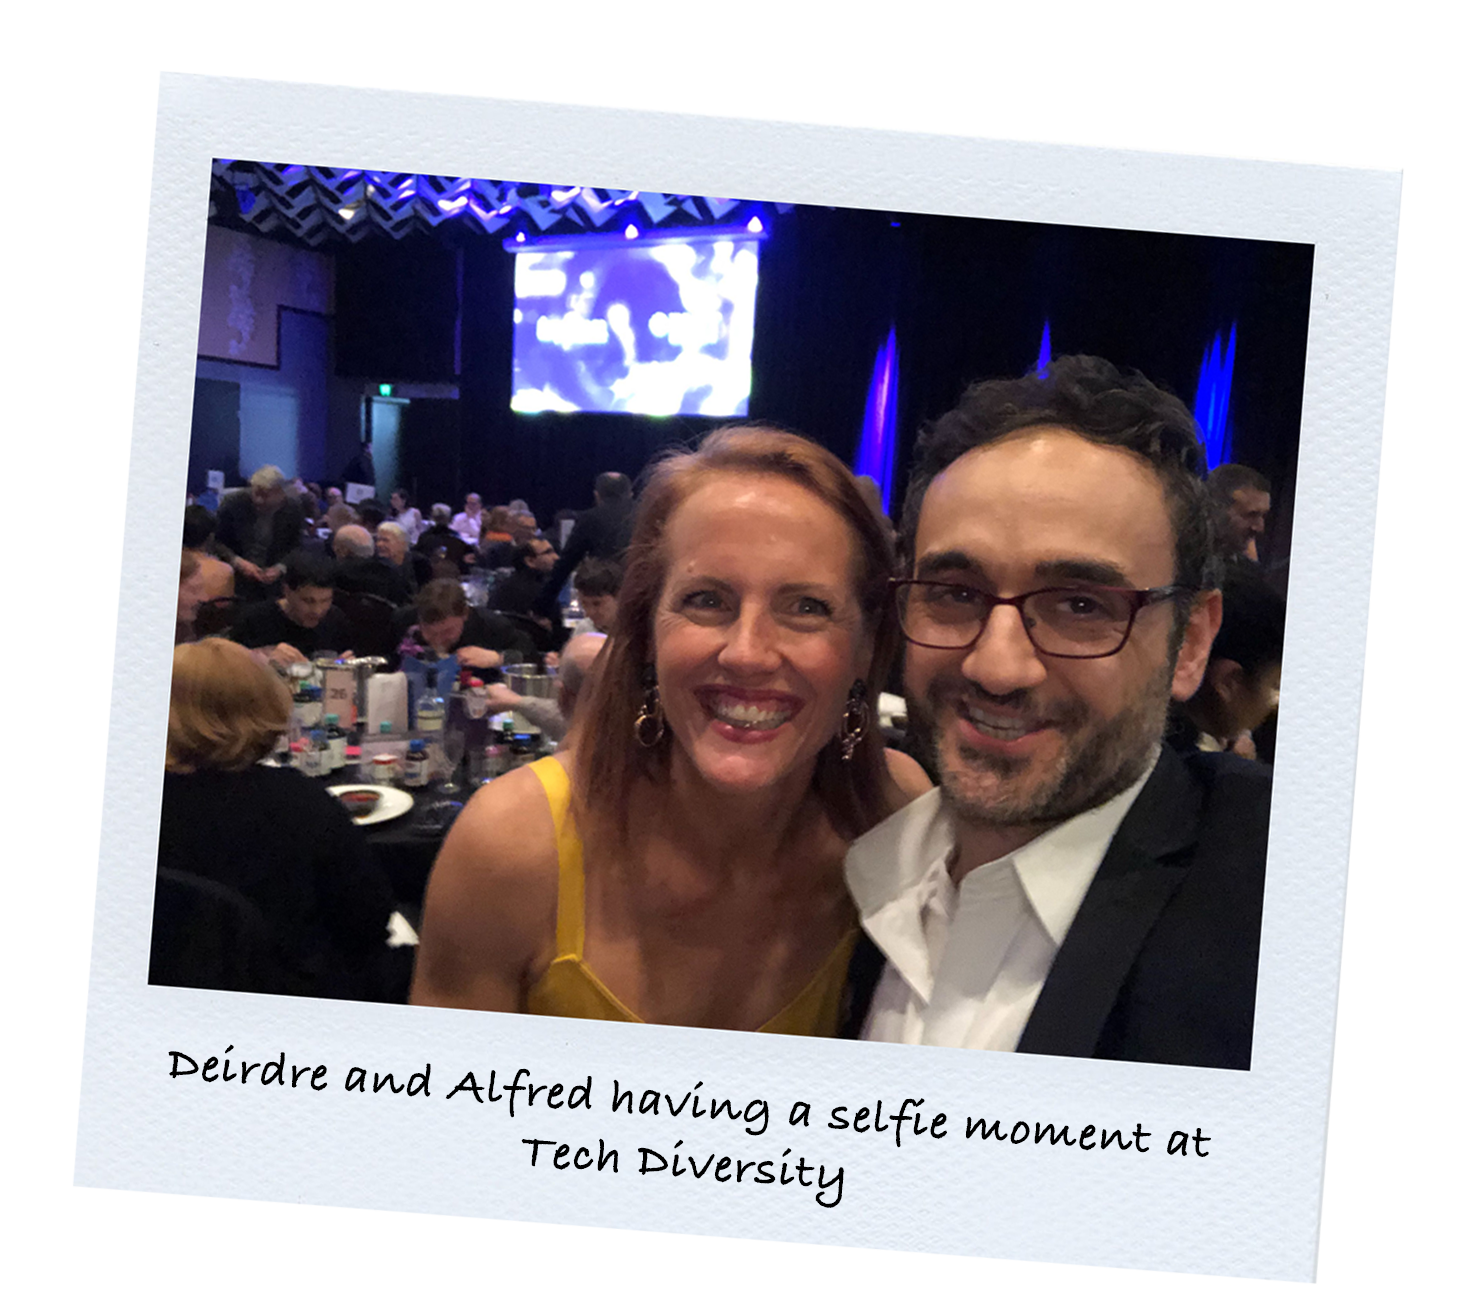 Photo of Deirdre Diamante and Alfred Deeb at Tech Diversity